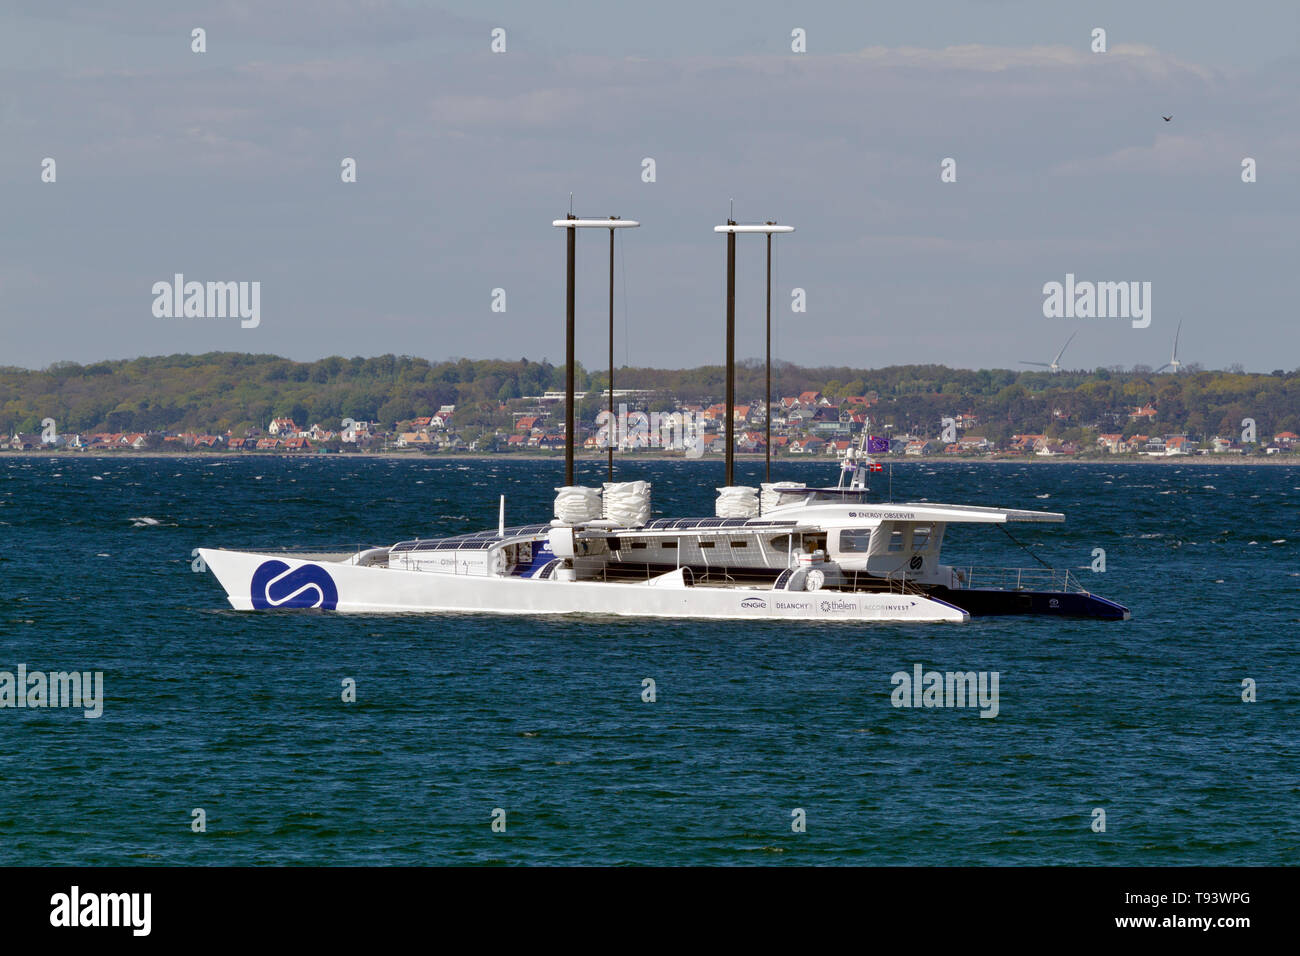 The wind, solar and hydrogen powered ENERGY OBSERVER in the Sound Øresund, north of Elsinore on its odyssey around the world headed for Copenhagen. Stock Photo